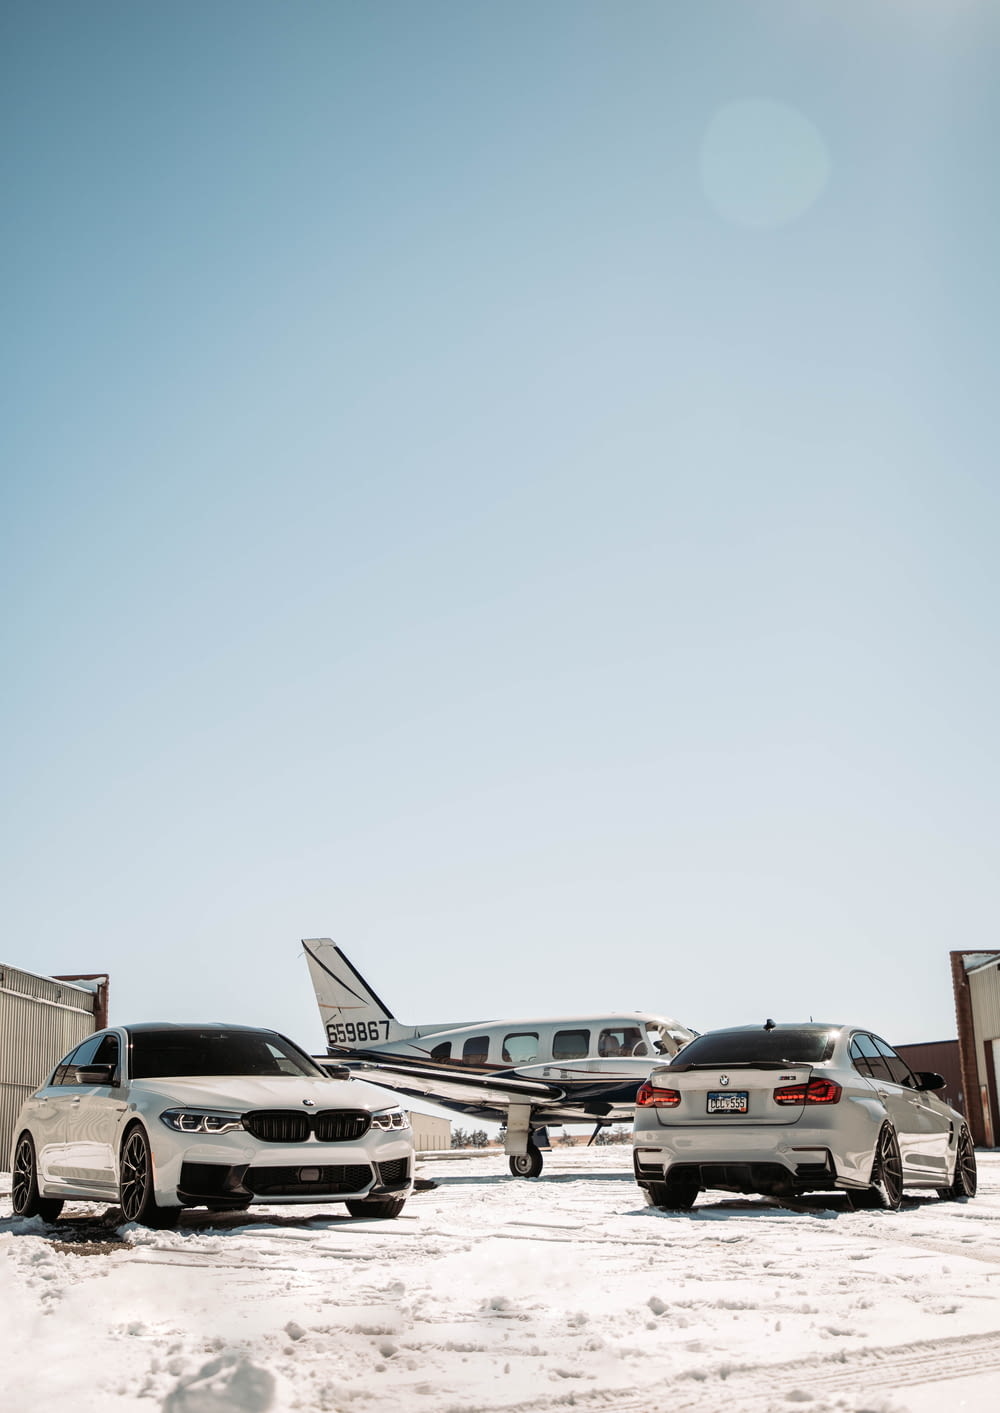 two cars parked in front of an airplane